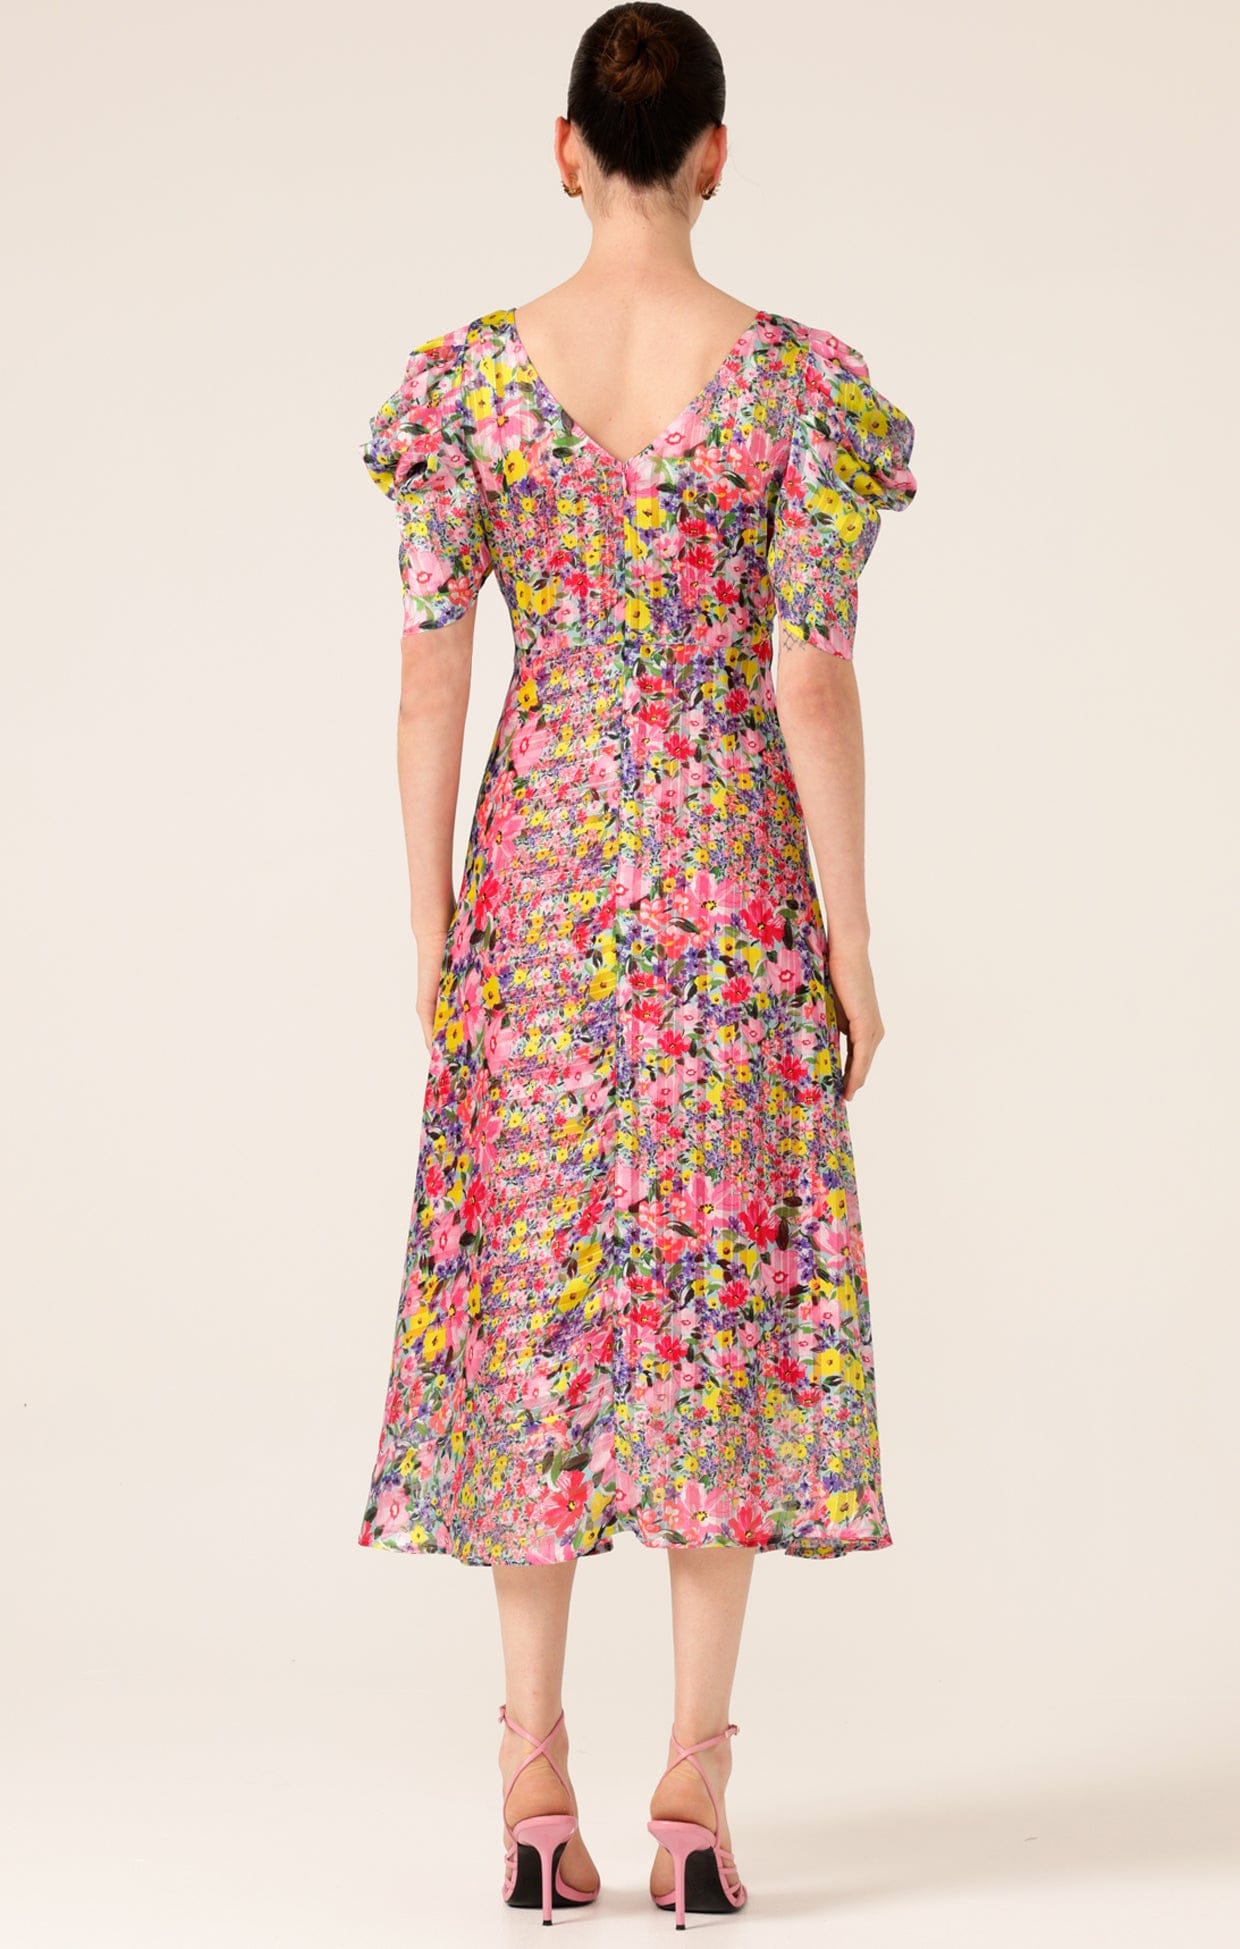 Dresses Events NEW BLOOMS MIDI IN PINK MULTI FLORAL